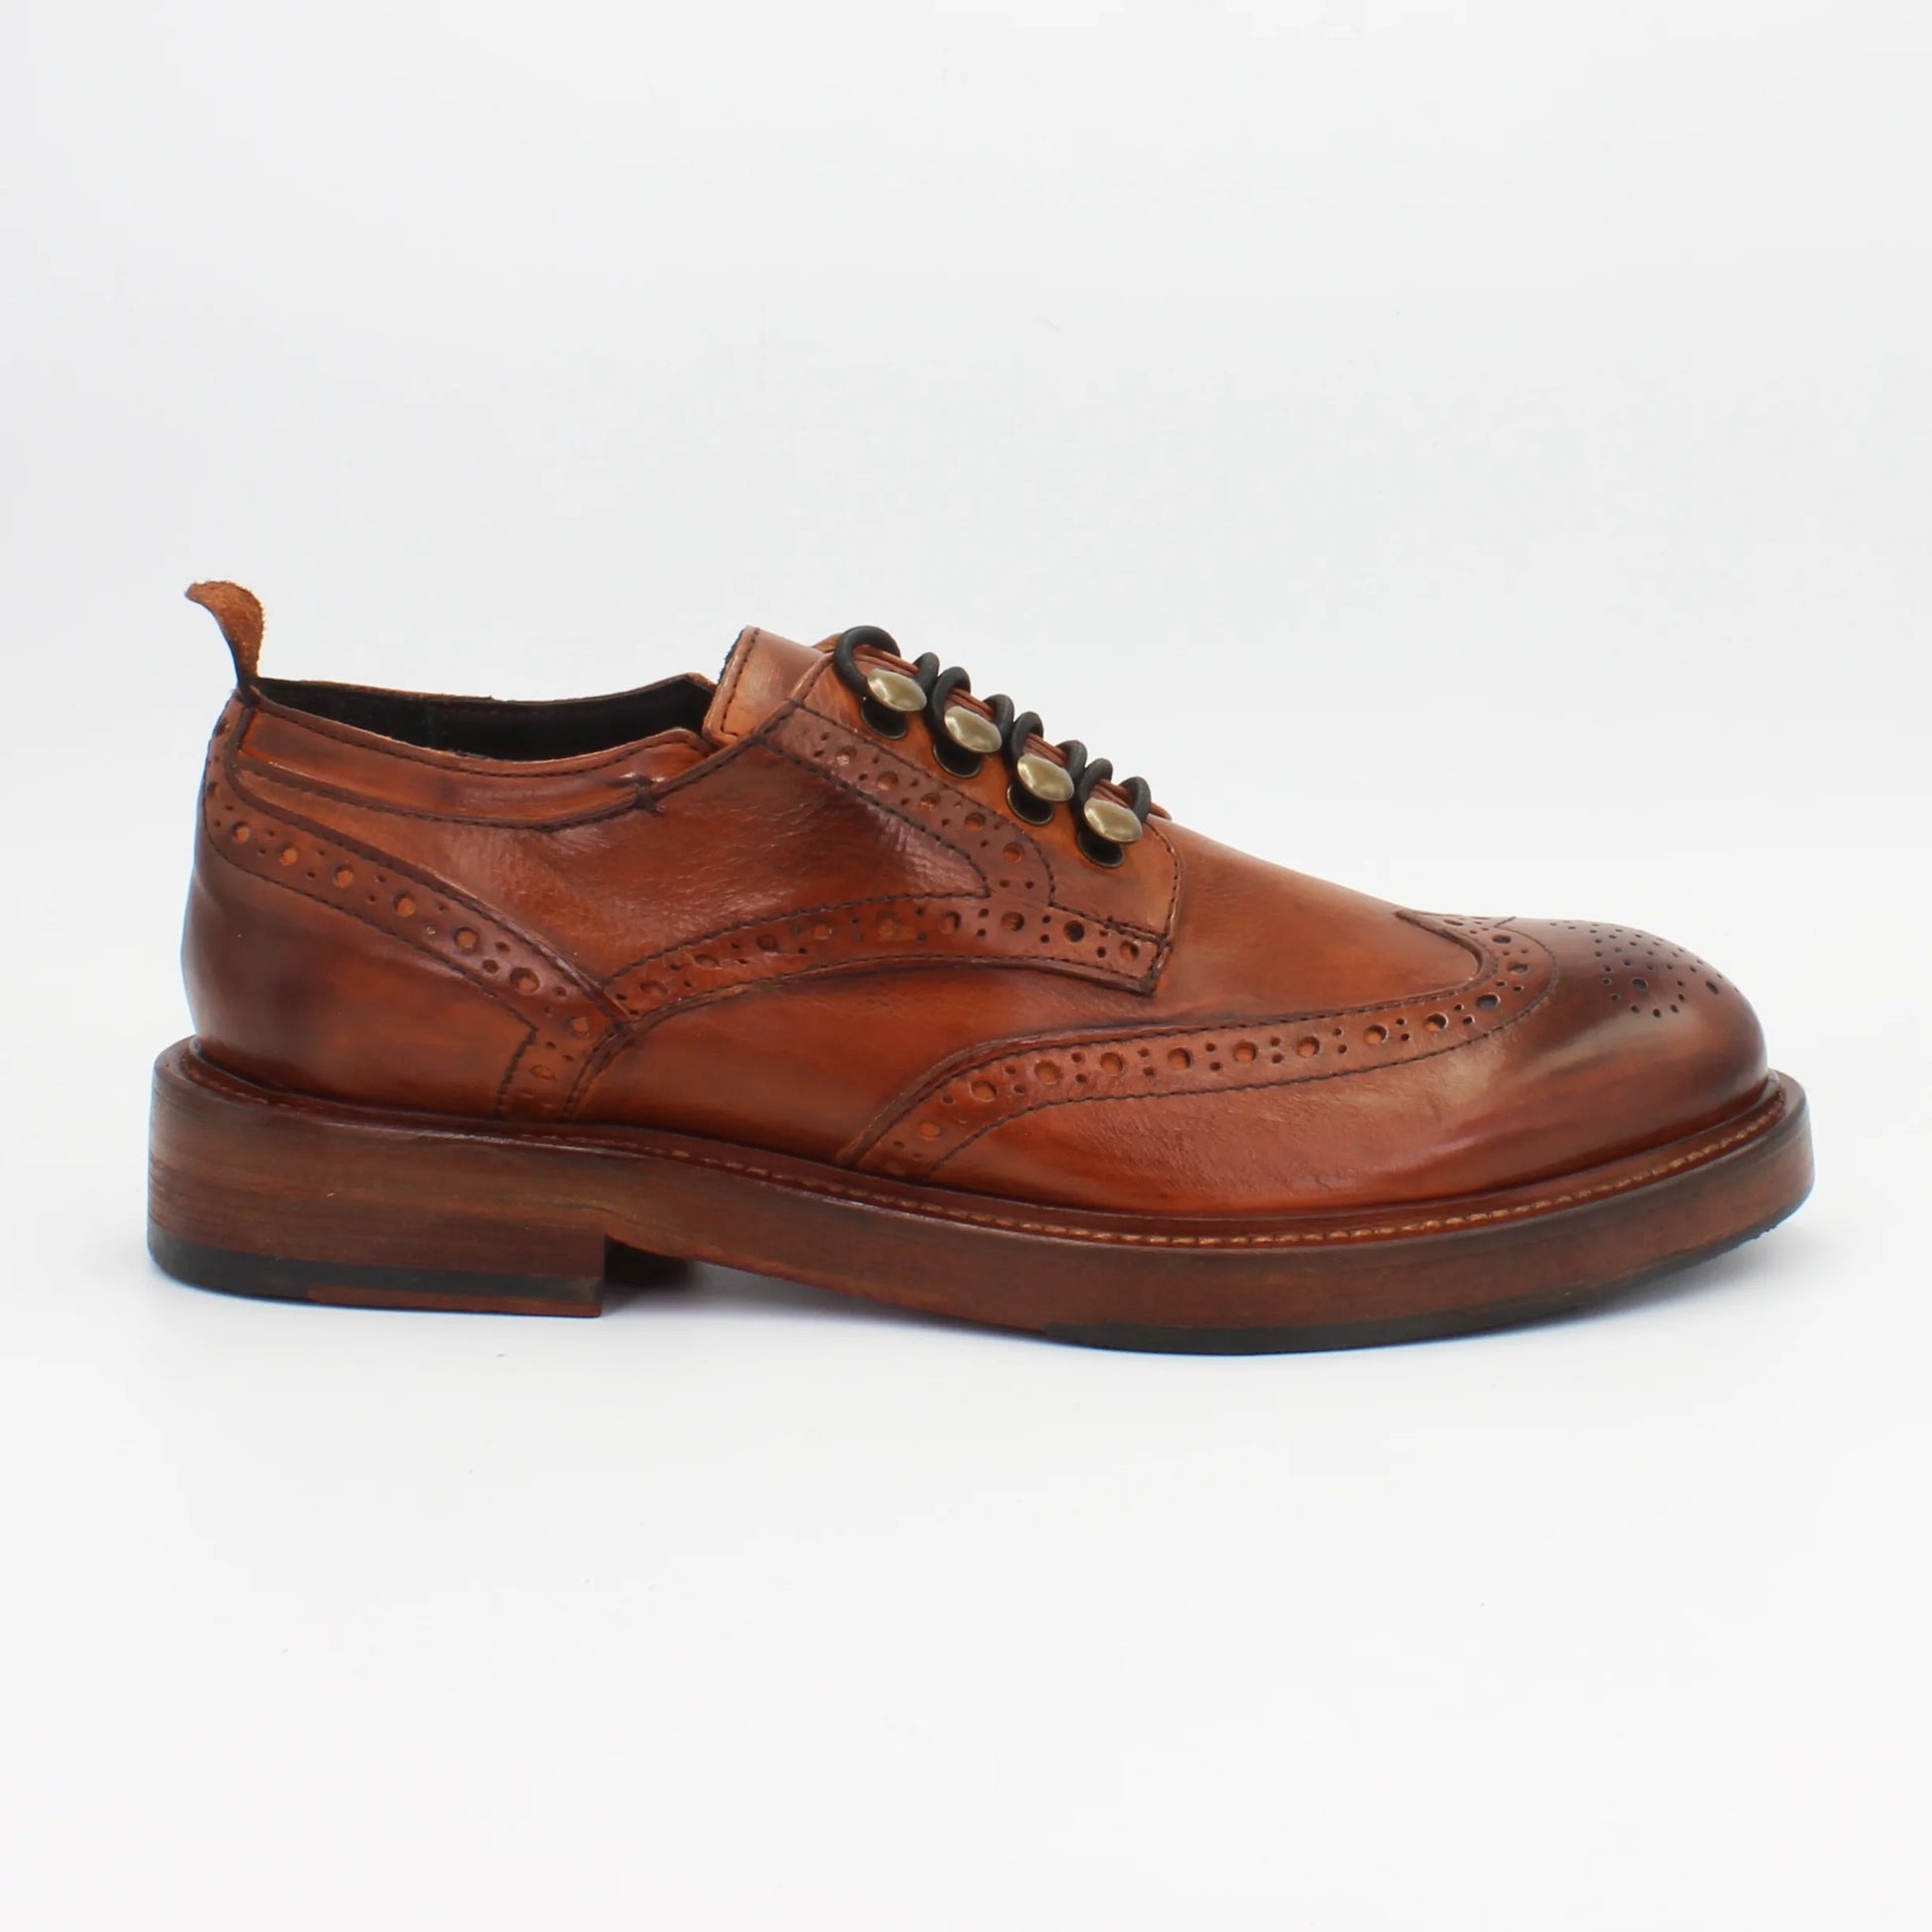 Shop Handmade Italian Leather Oxford in Cuoio (JP37907/1) or browse our range of hand-made Italian shoes for women in leather or suede in-store at Aliverti Cape Town, or shop online. We deliver in South Africa & offer multiple payment plans as well as accept multiple safe & secure payment methods.